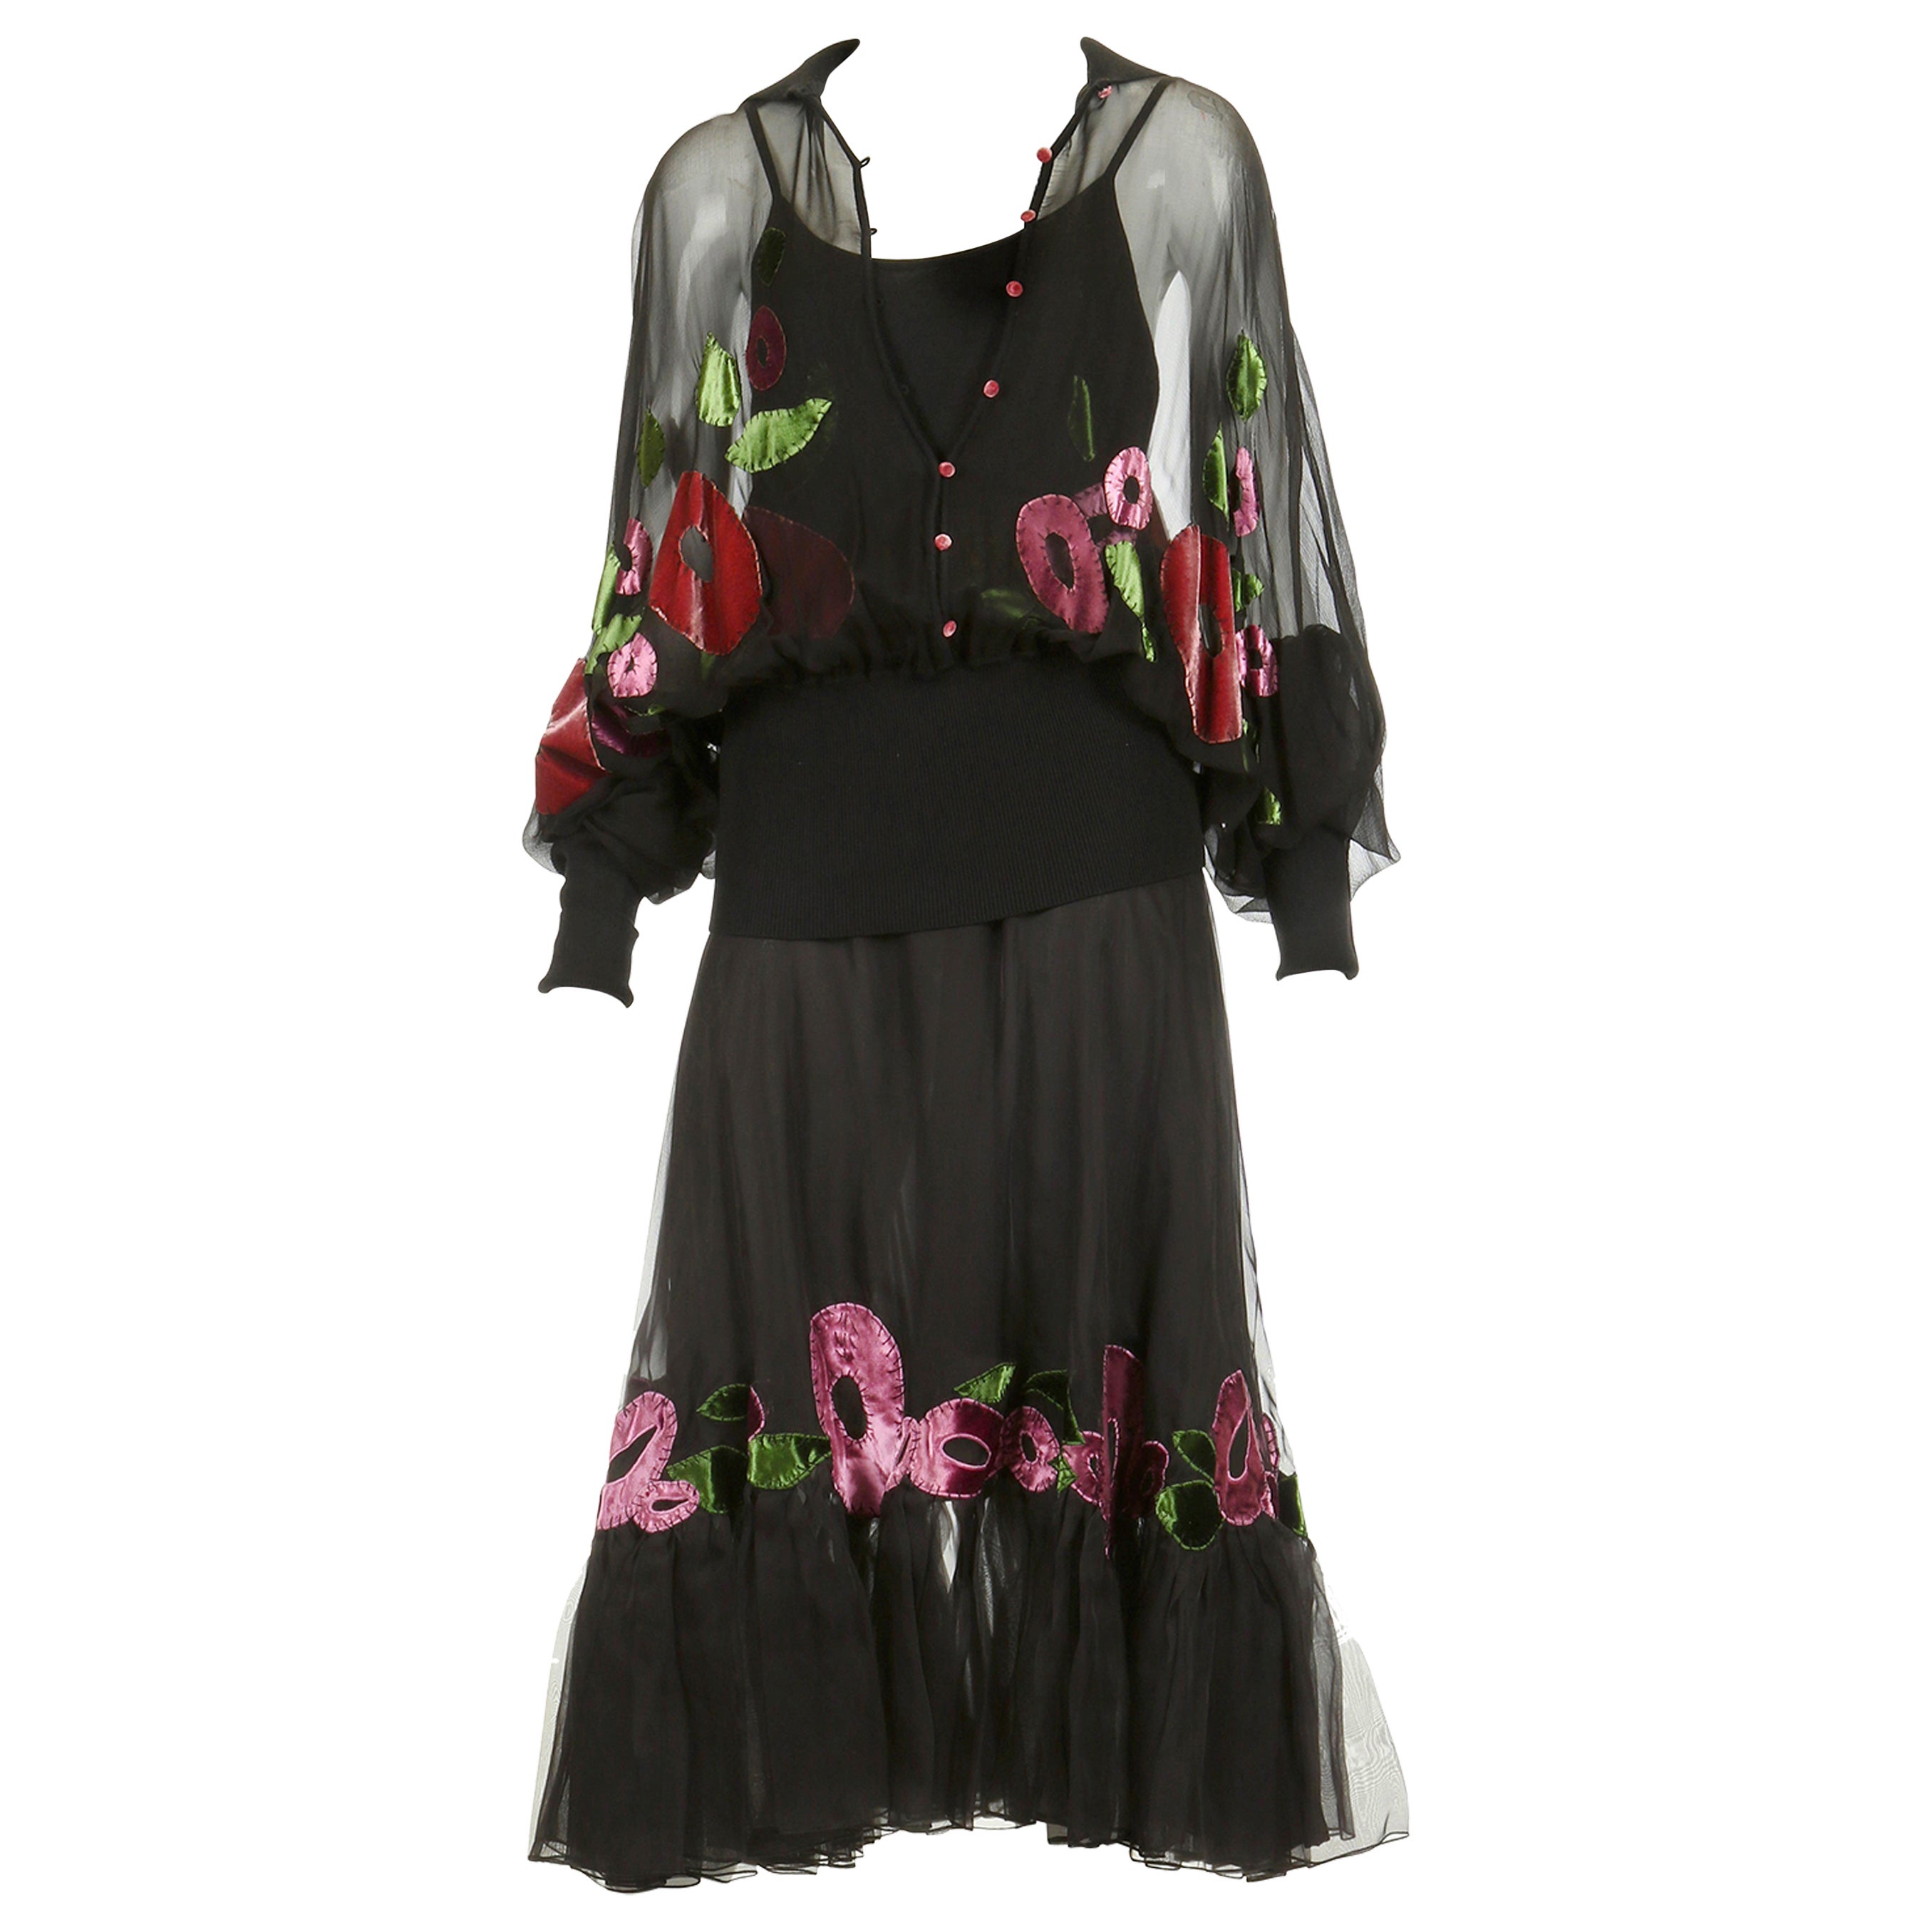 2002 Christian Dior by Galliano 3-Piece Skirt & Blouse Set w/Velvet Floral Motif For Sale